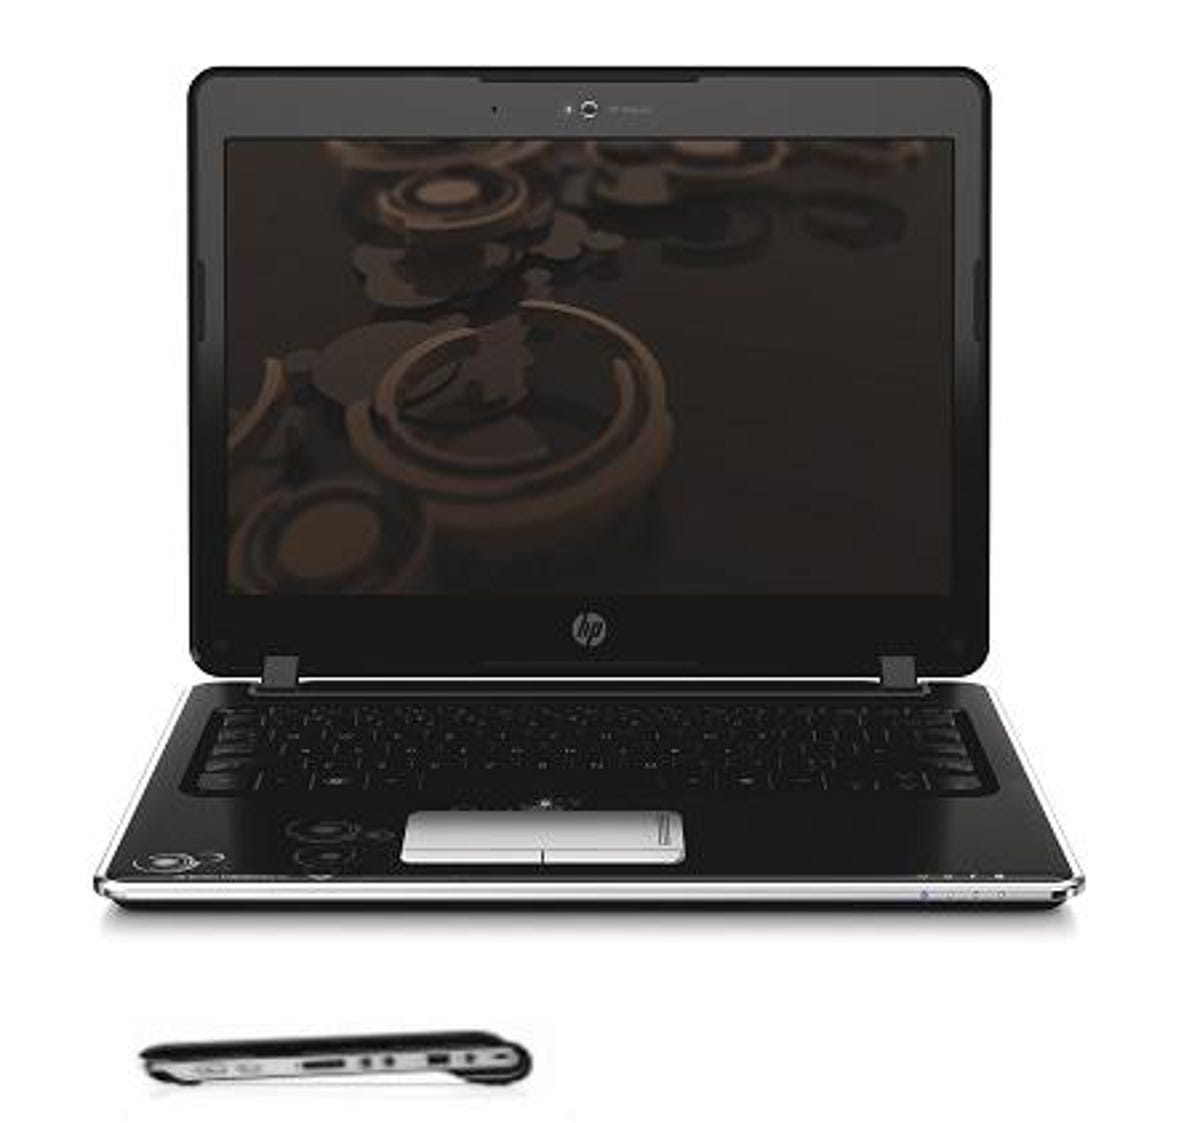 HP 12-inch Pavilion dv2 ultraportable starts at $699, at least half the price of traditional ultraportable notebooks like the MacBook Air, Toshiba Portege, and Sony Vaio TT series.